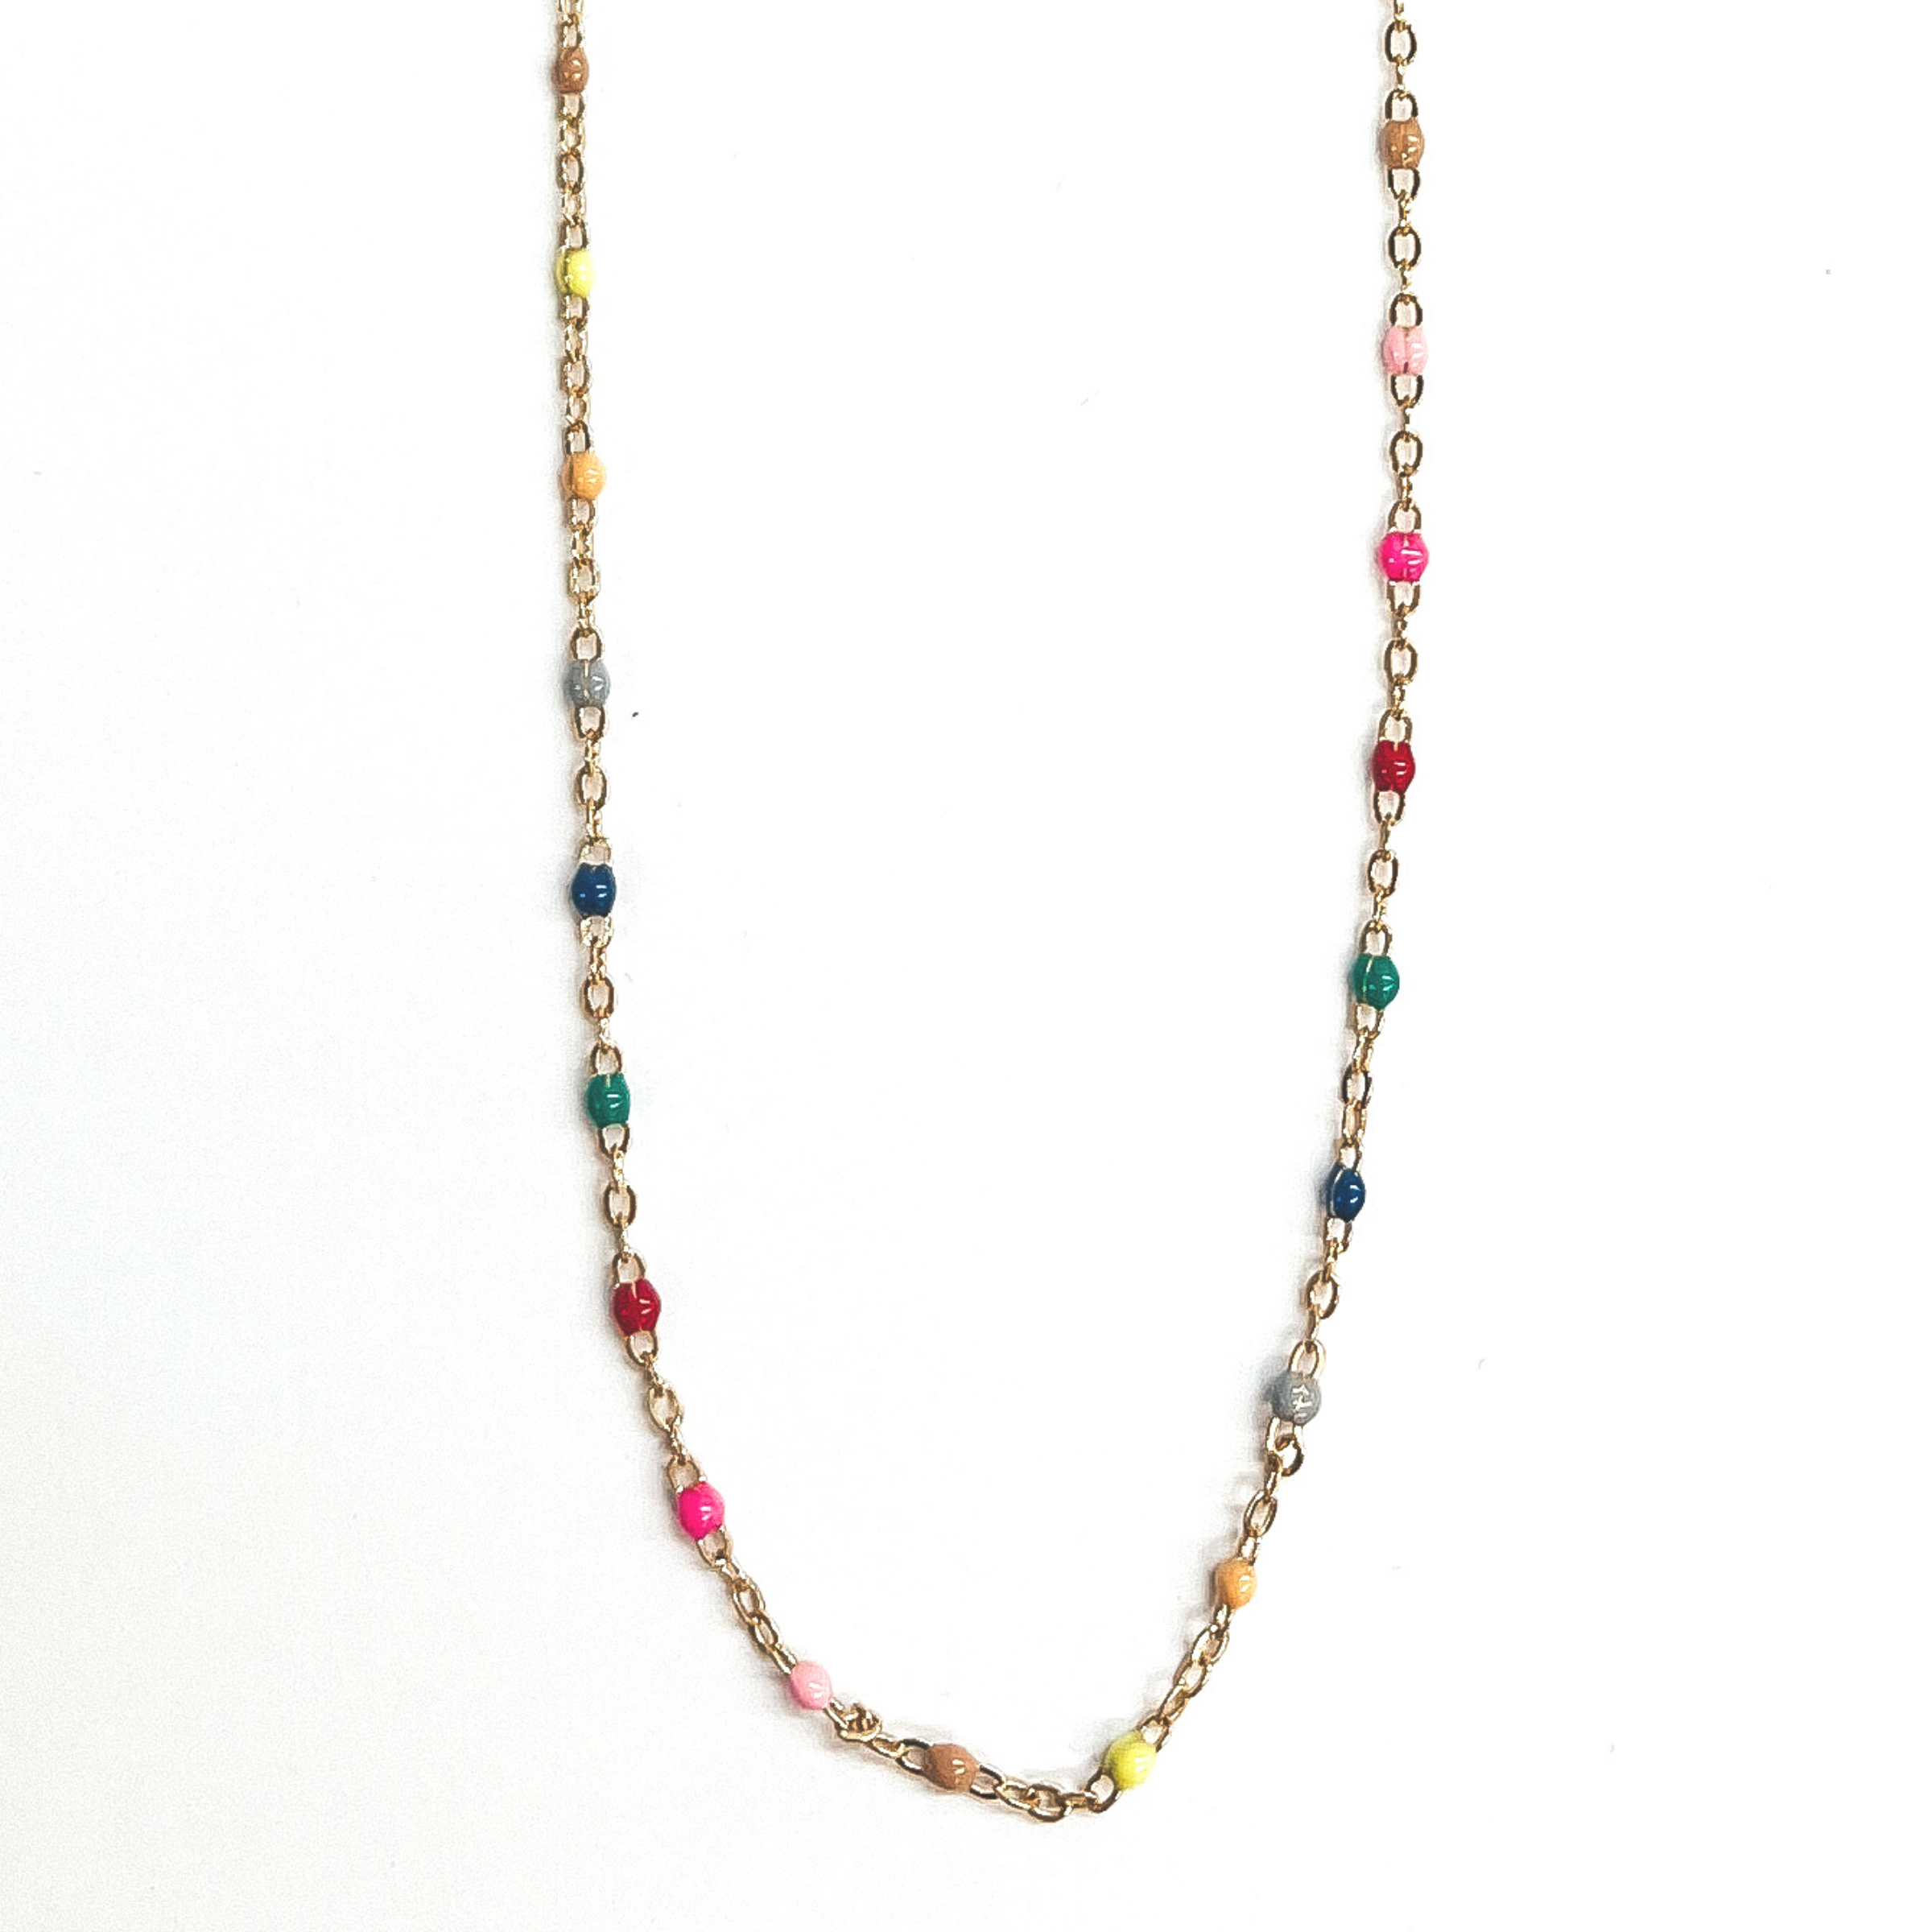 36 Inch Gold Necklace with Multicolored Beads